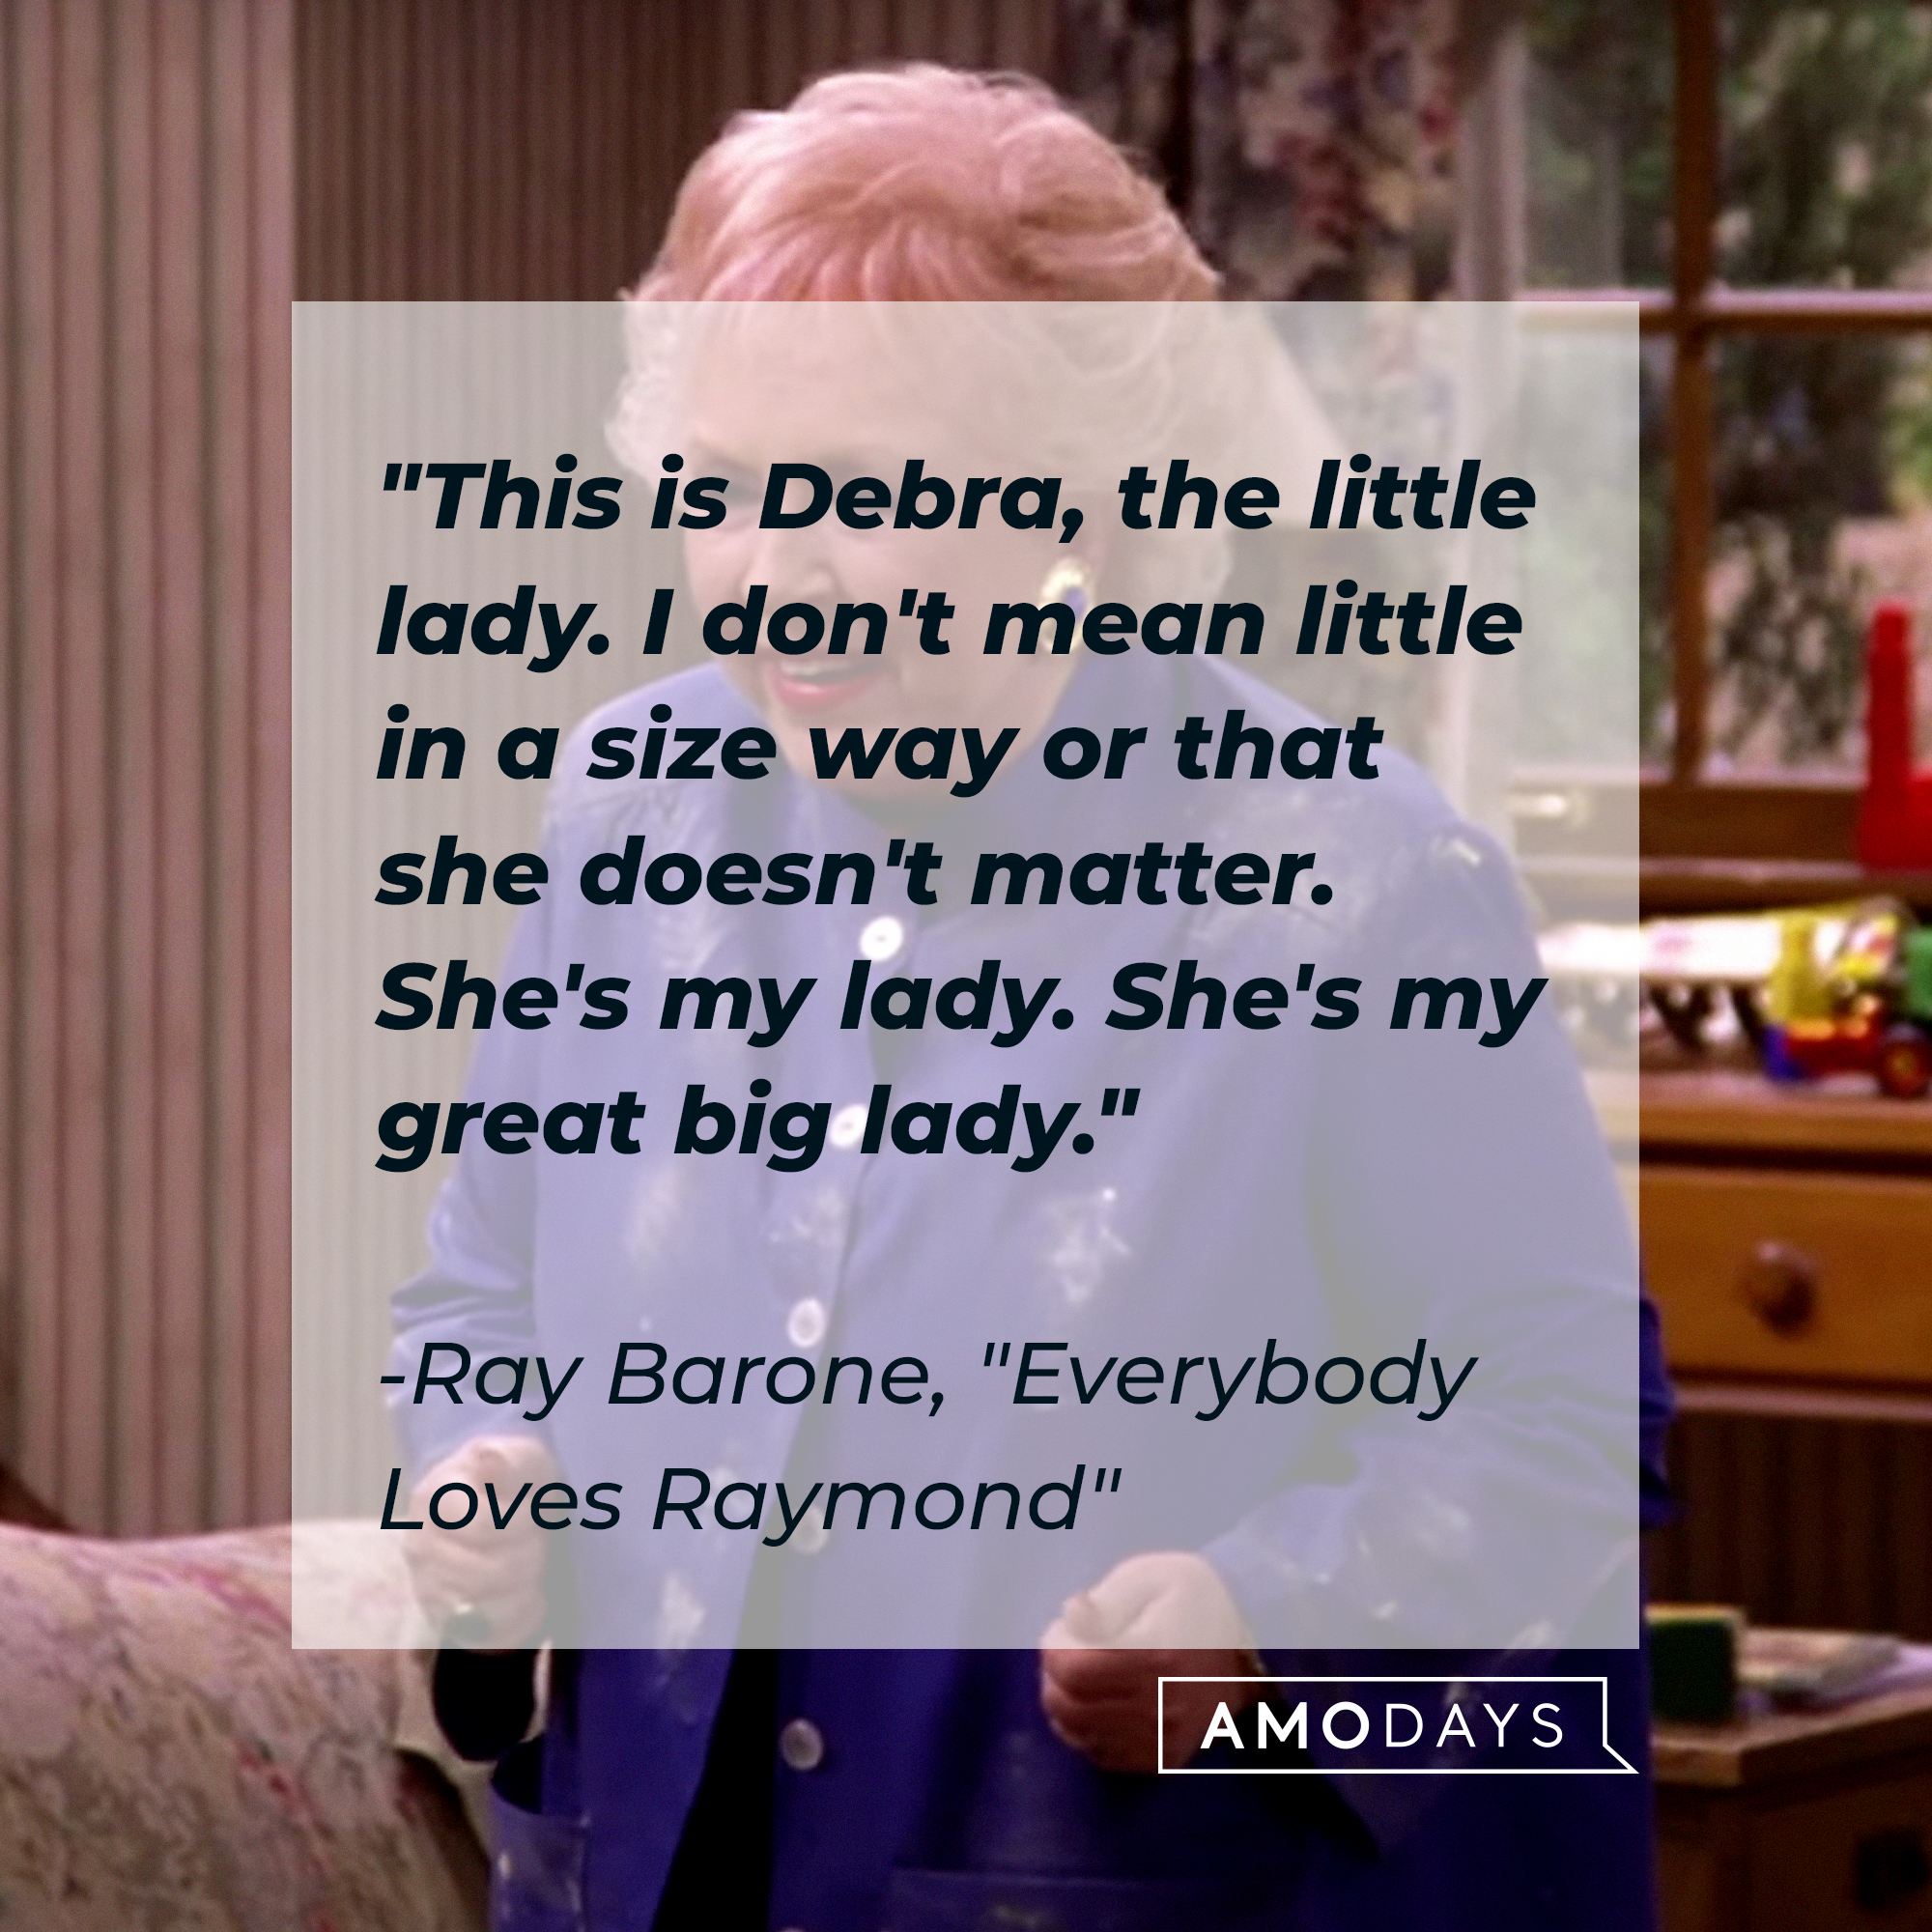 "Everybody Loves Raymond" quote, "This is Debra, the little lady. I don't mean little in a size way or that she doesn't matter. She's my lady. She's my great big lady." | Source: Facebook/EverybodyLovesRaymondTVShow